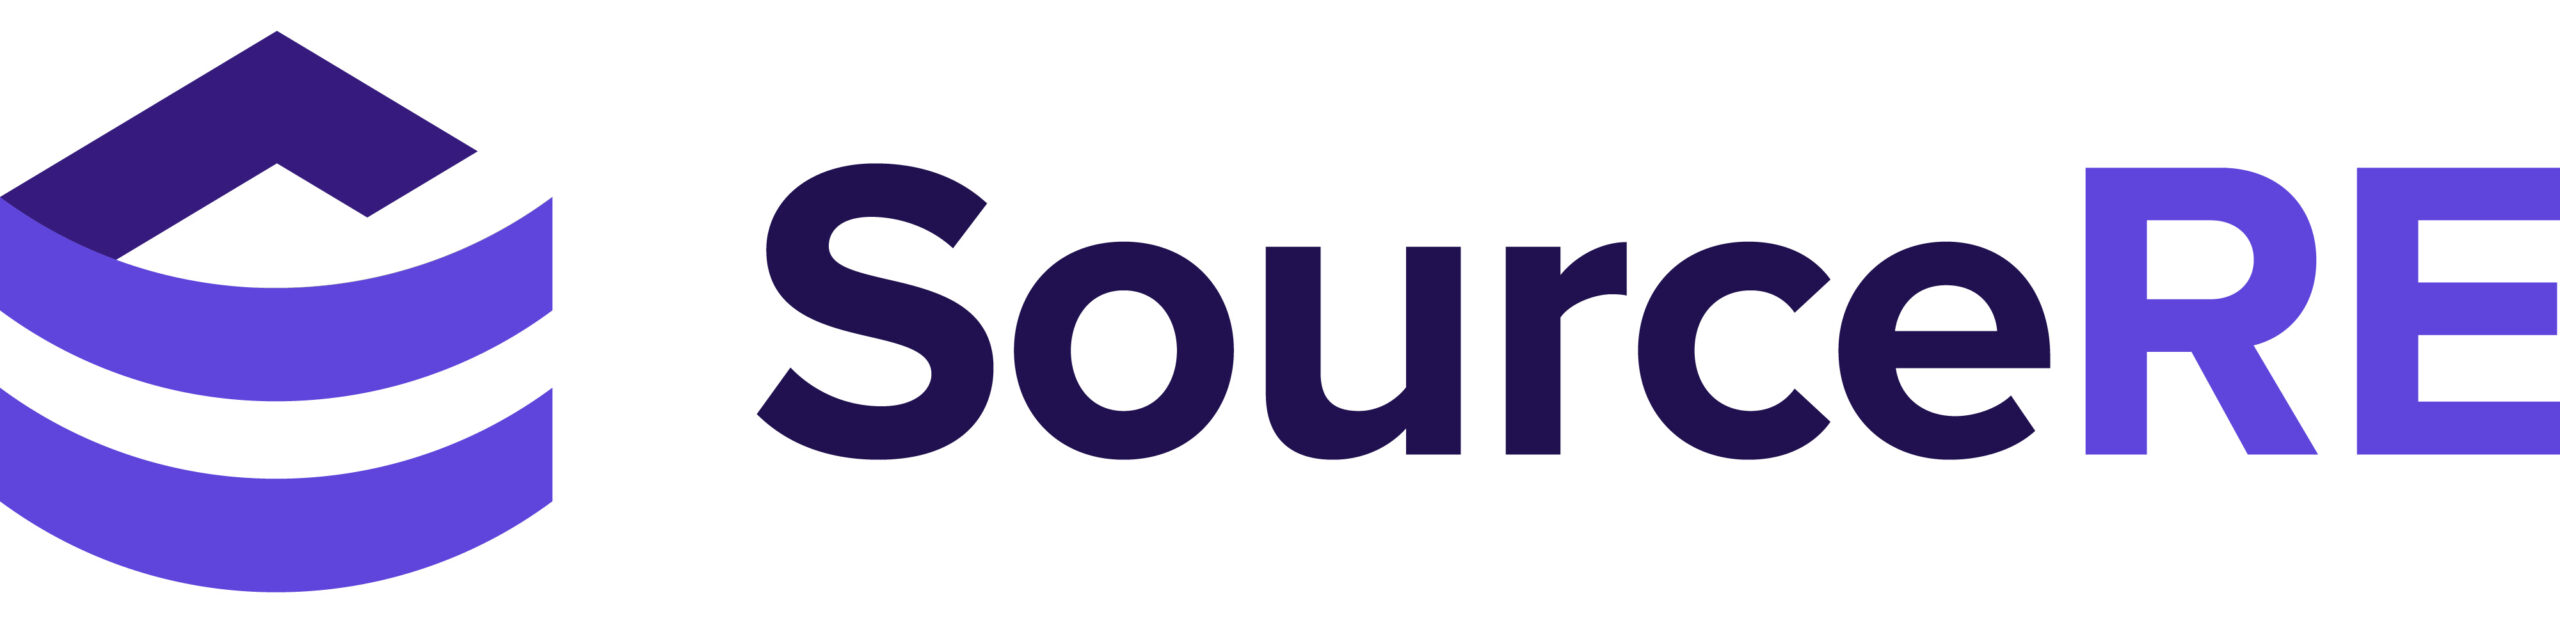 SourceRE Horizontal Logo RGB Full Color Scaled